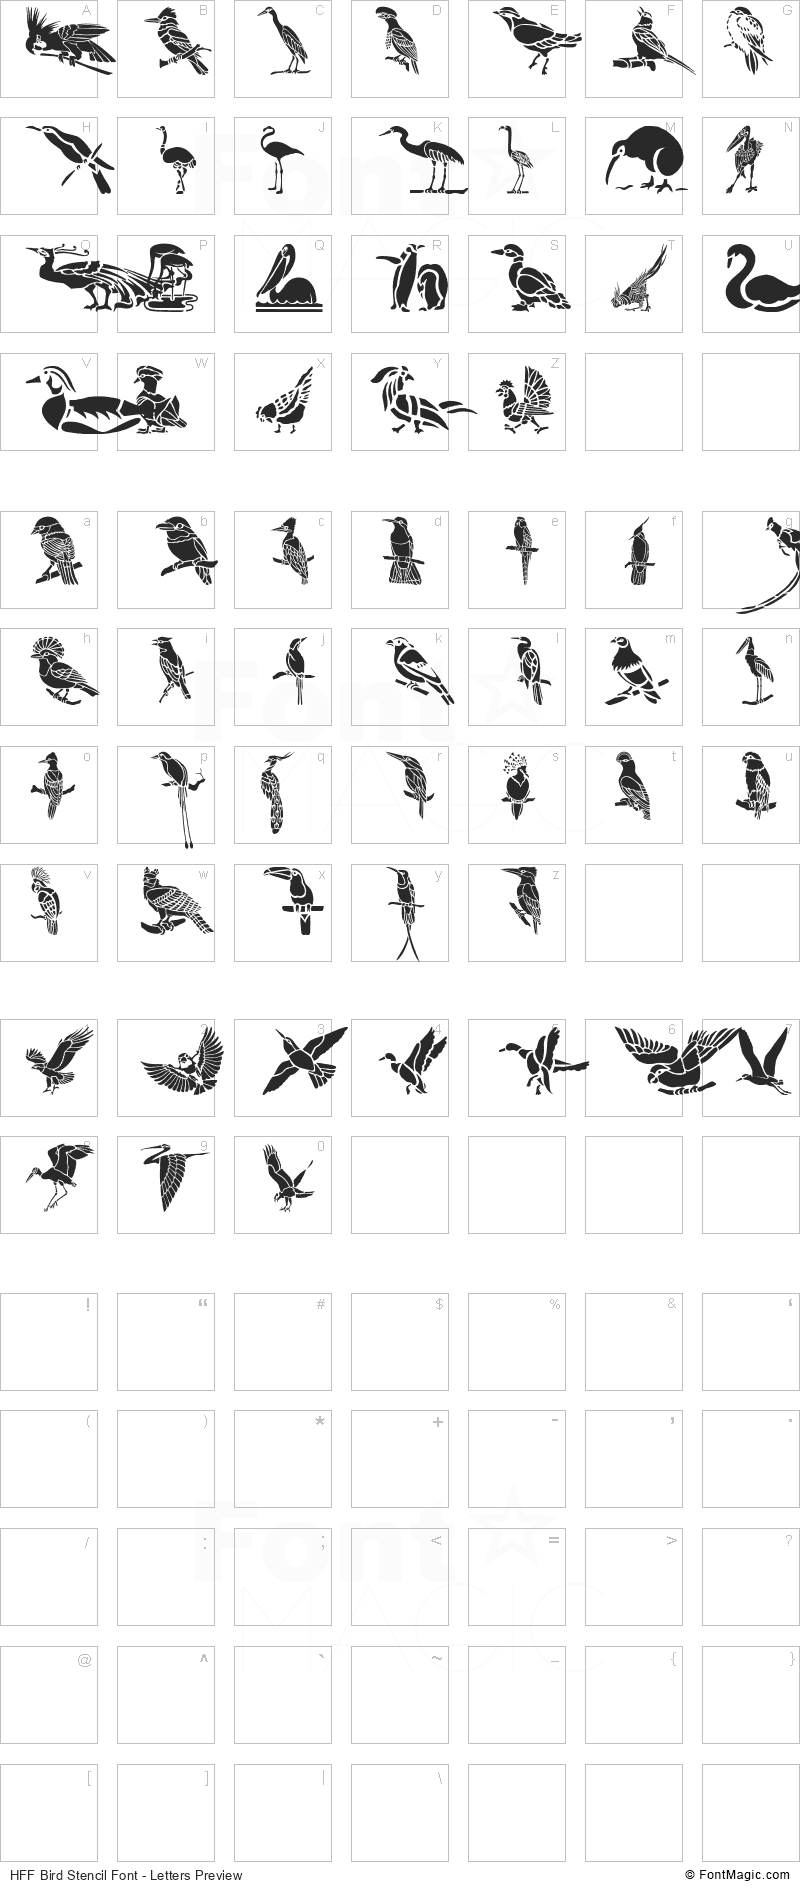 HFF Bird Stencil Font - All Latters Preview Chart